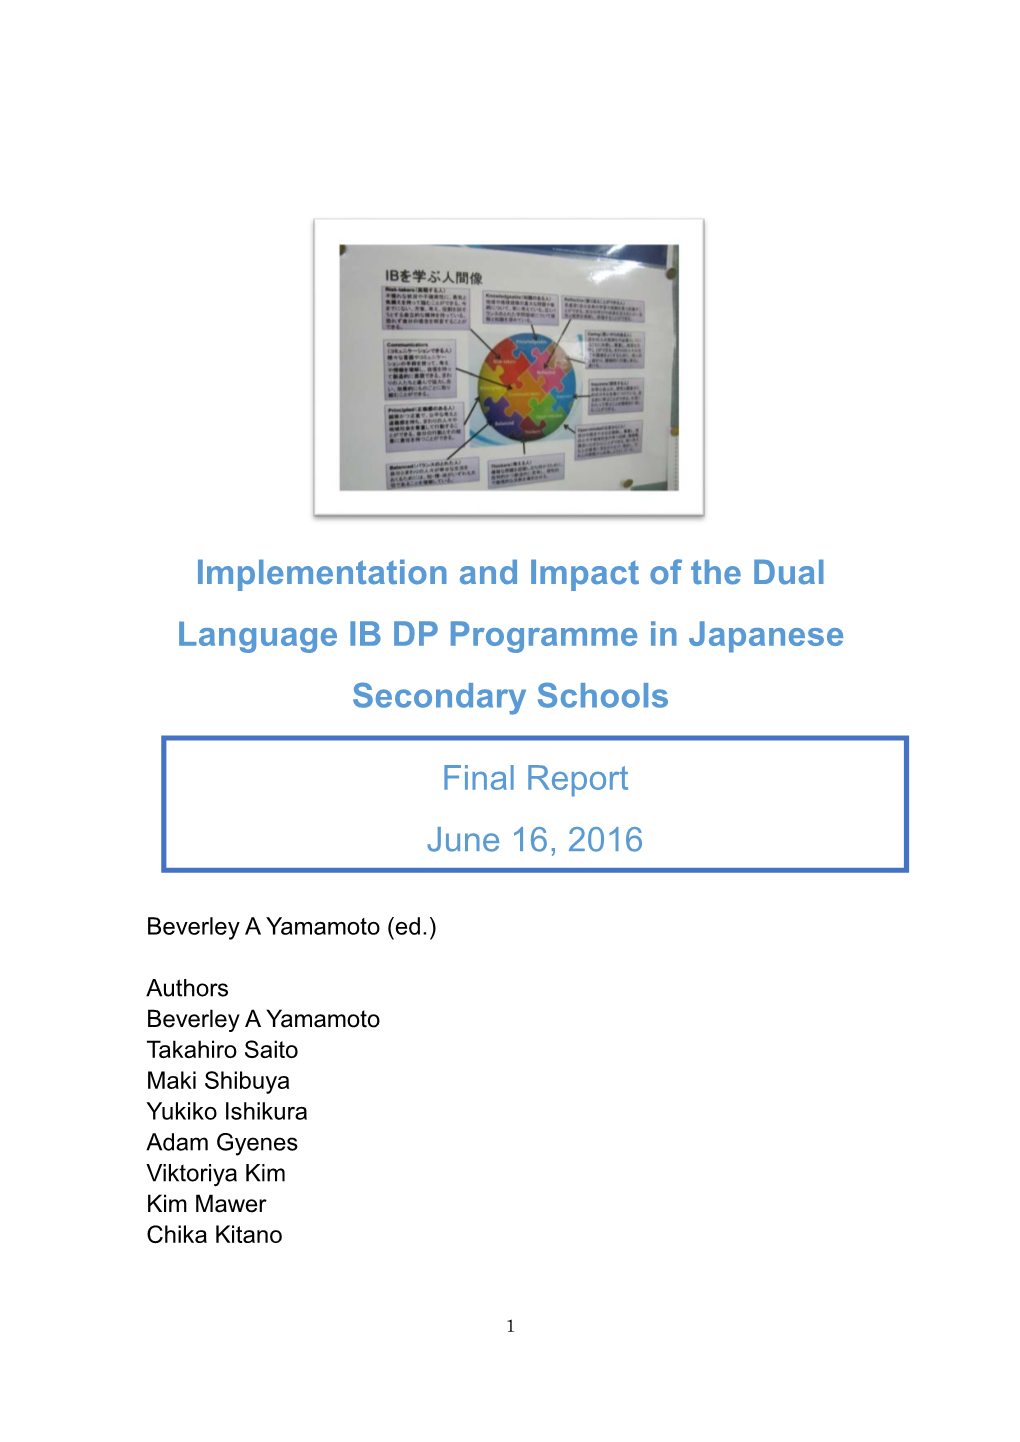 Implementation and Impact of the Dual Language IB DP Programme in Japanese Secondary Schools